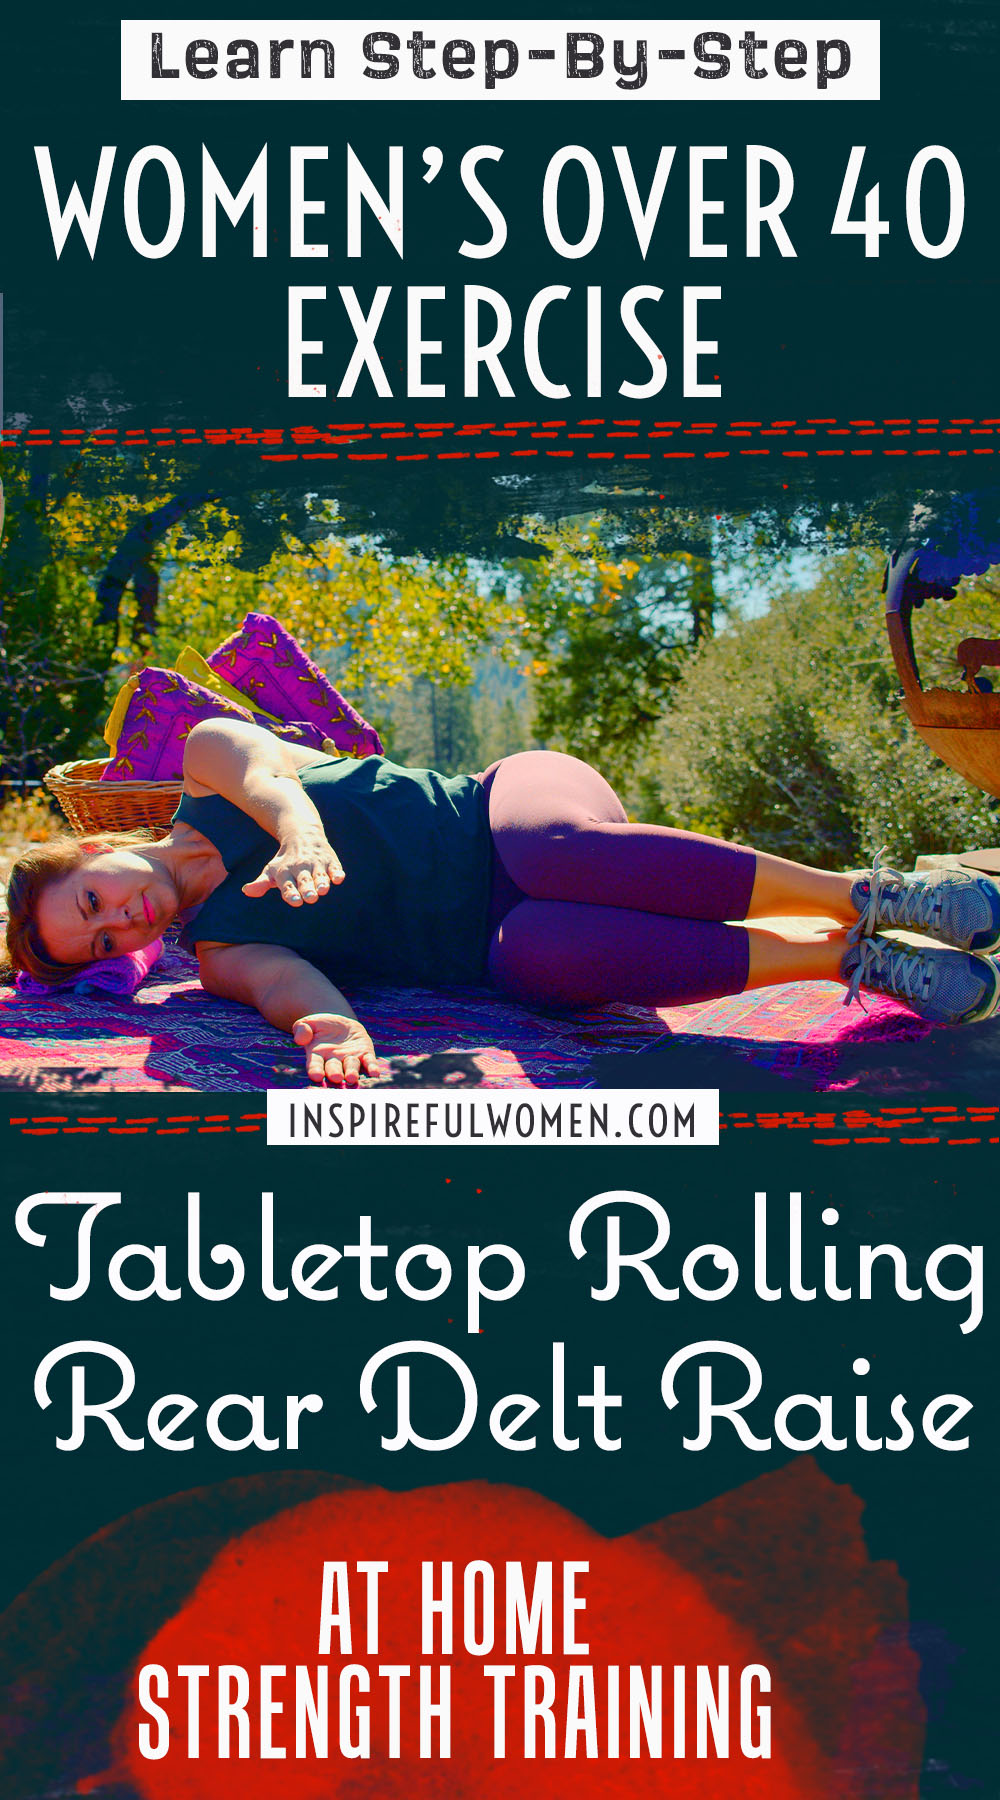 tabletop-rolling-rear-delt-raise-no-weights-posterior-deltoid-shoulder-strength-exercise-women-over-40